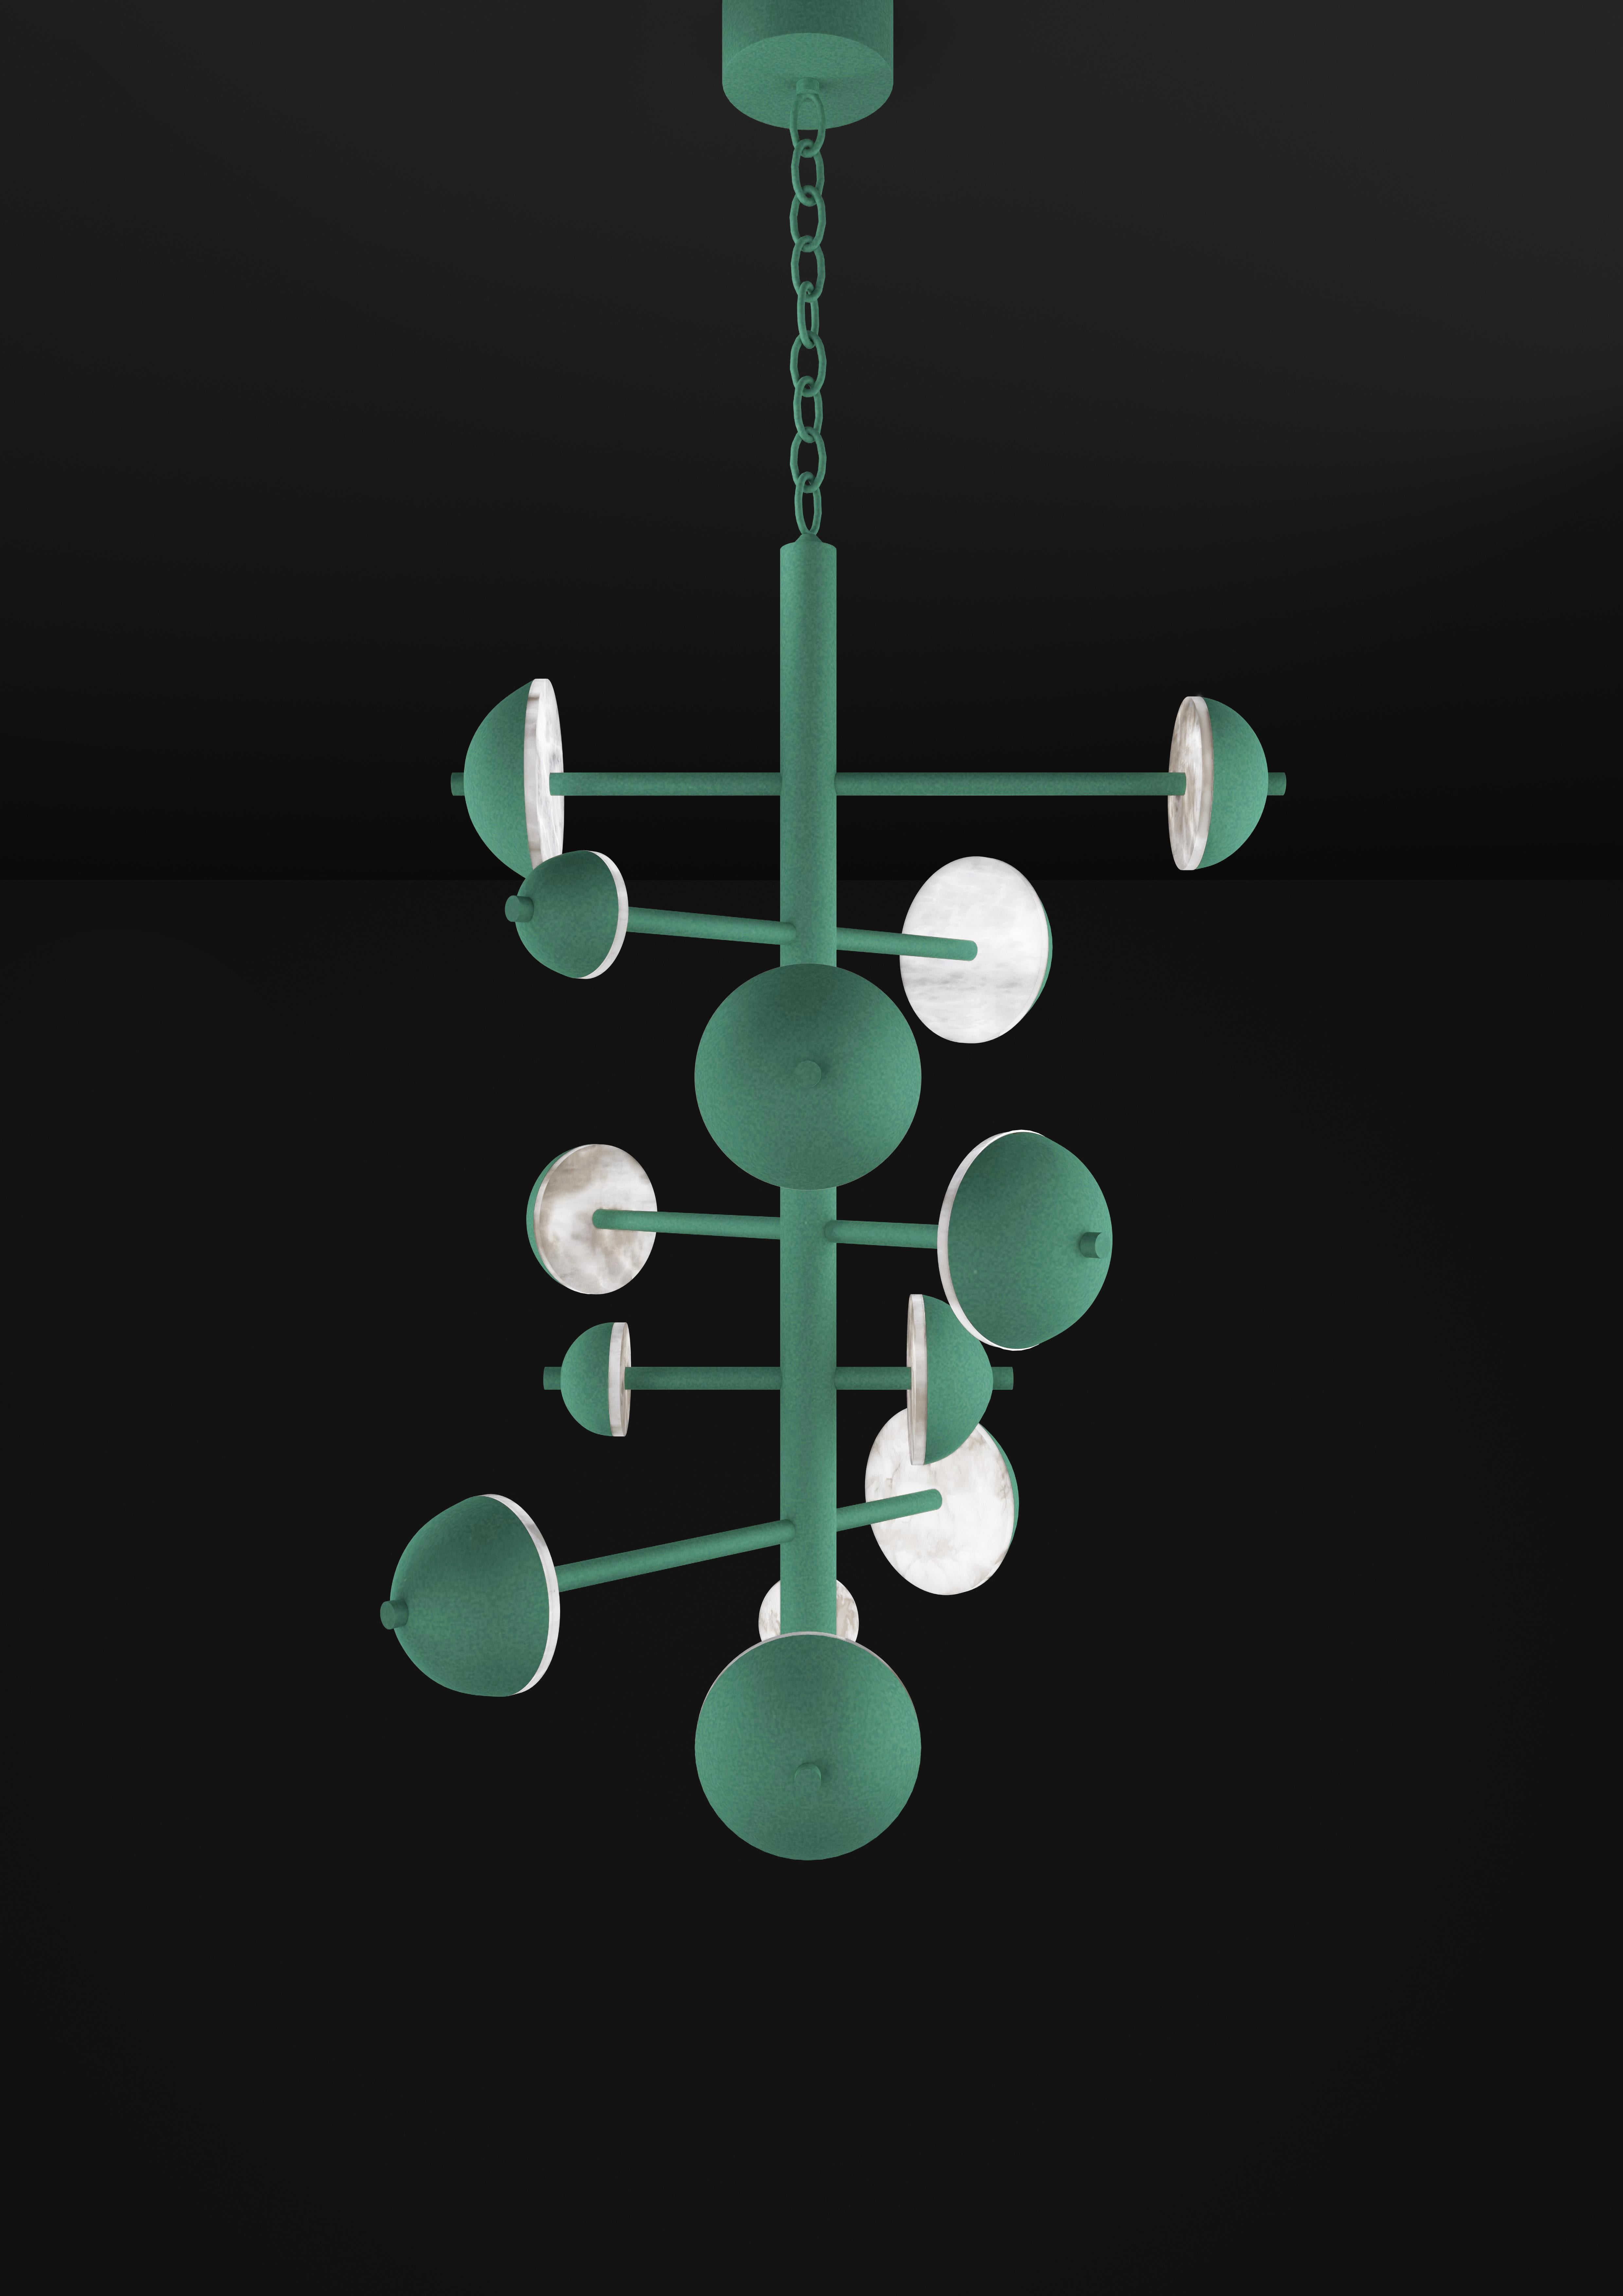 Ares Freedom Green Metal Chandelier by Alabastro Italiano
Dimensions: D 74,5 x W 73 x H 110 cm.
Materials: White alabaster and metal.

Available in different finishes: Shiny Silver, Bronze, Brushed Brass, Ruggine of Florence, Brushed Burnished,